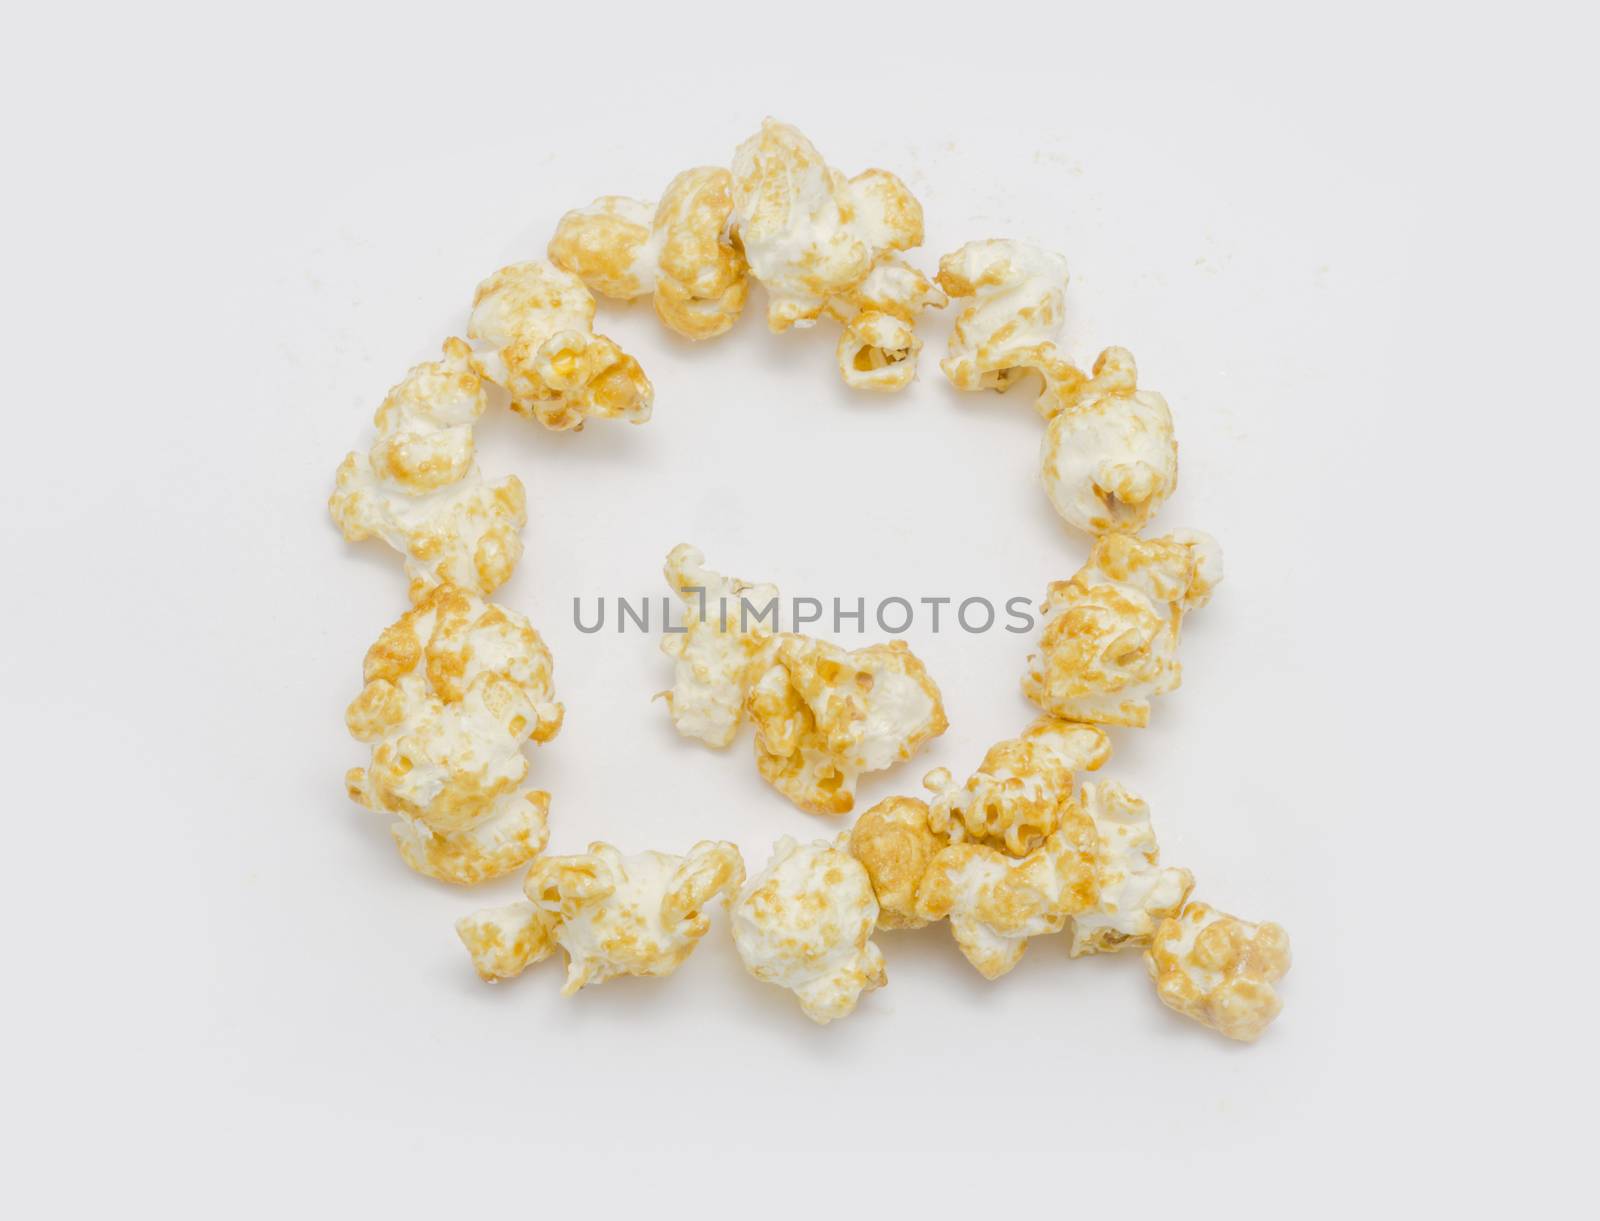 pop corn forming letter Q isolated on white background by chingraph